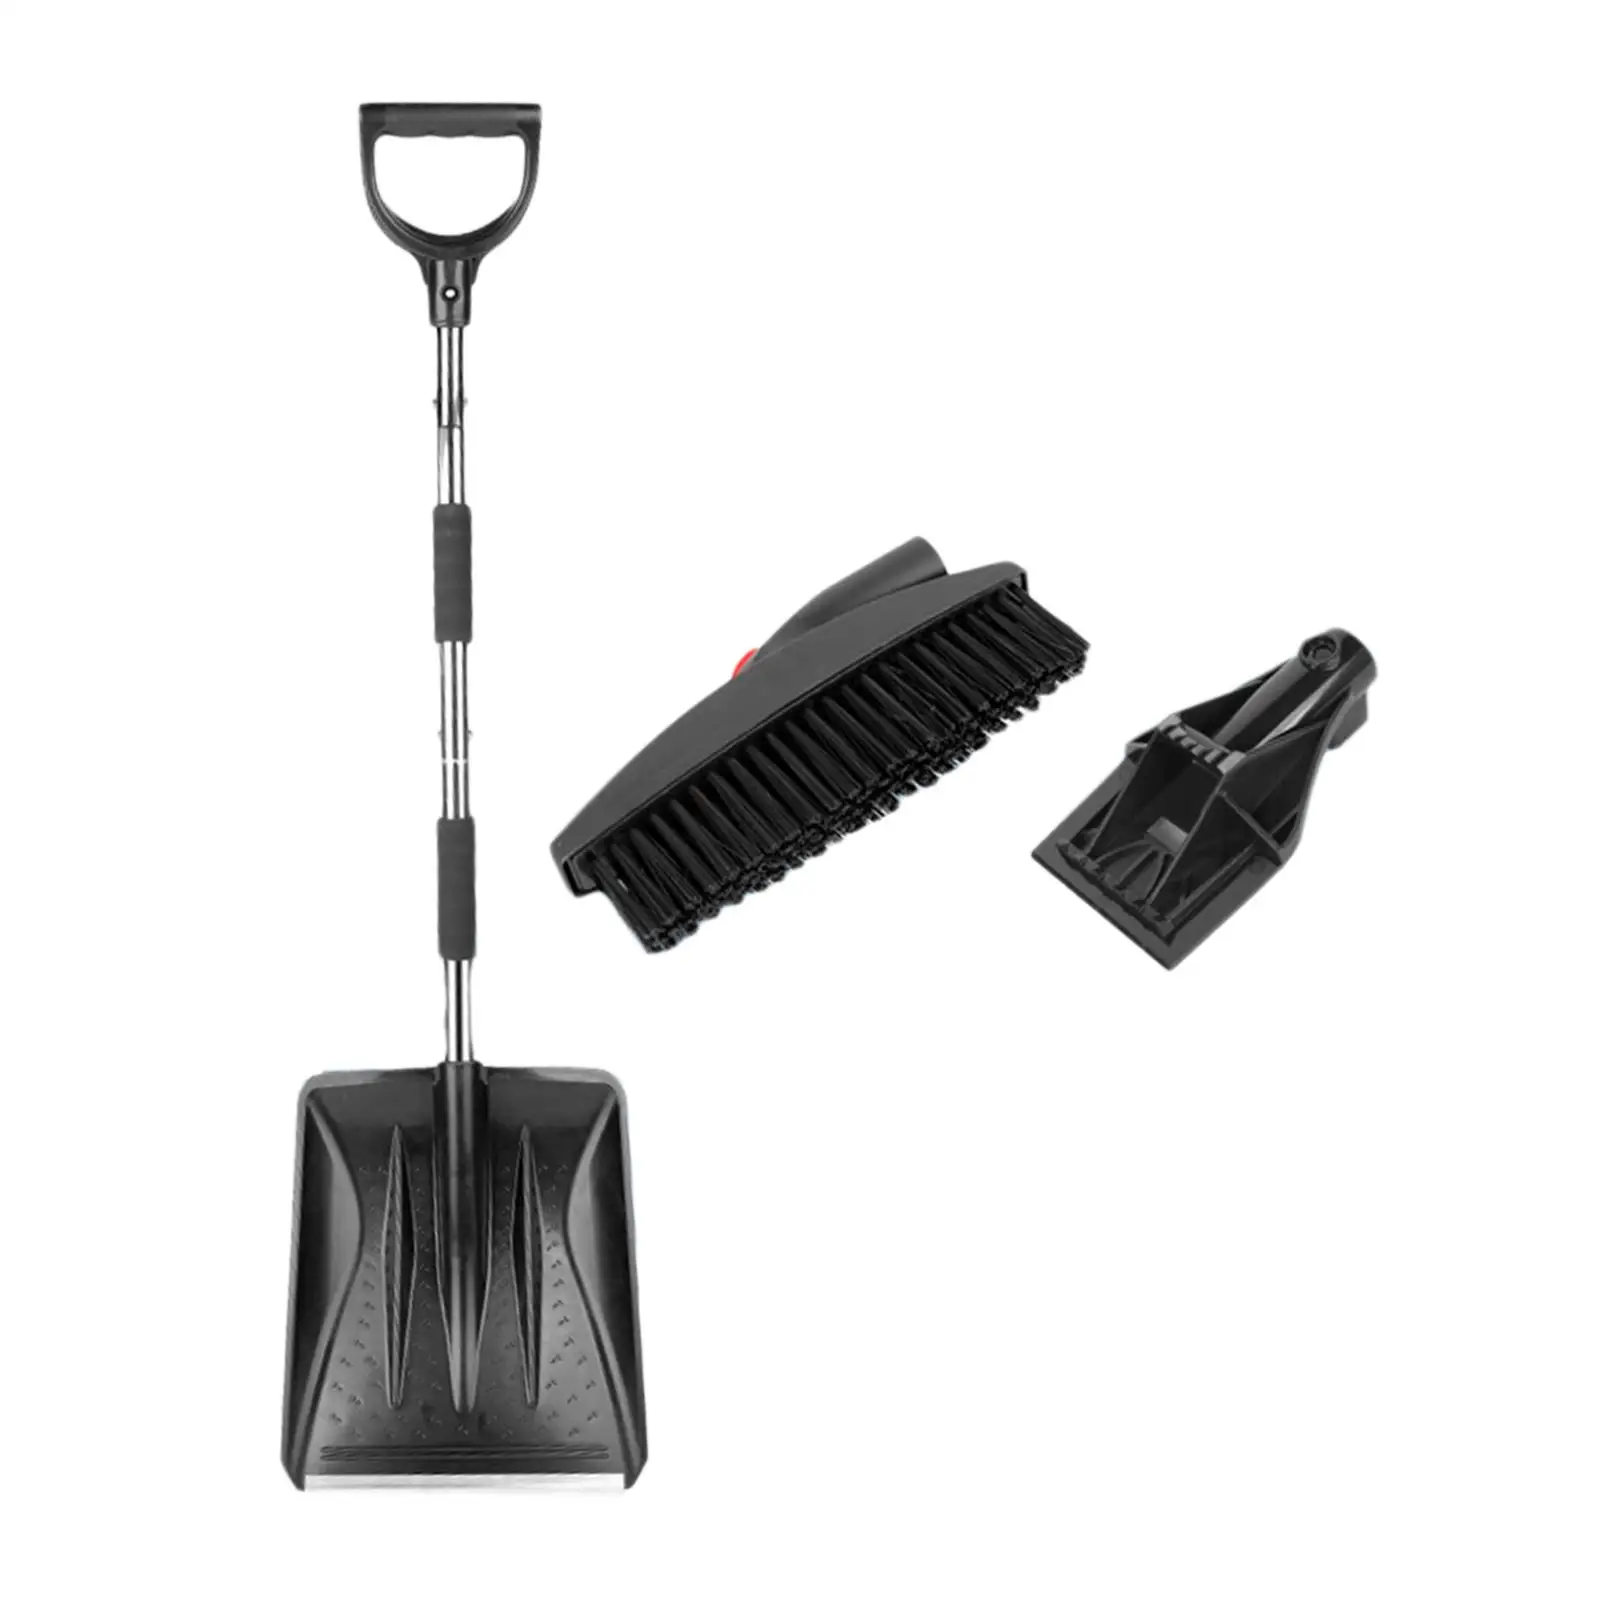 Snow Brush Scraper Snow Shovel for Car Snow Removal Tools for Vehicles Car